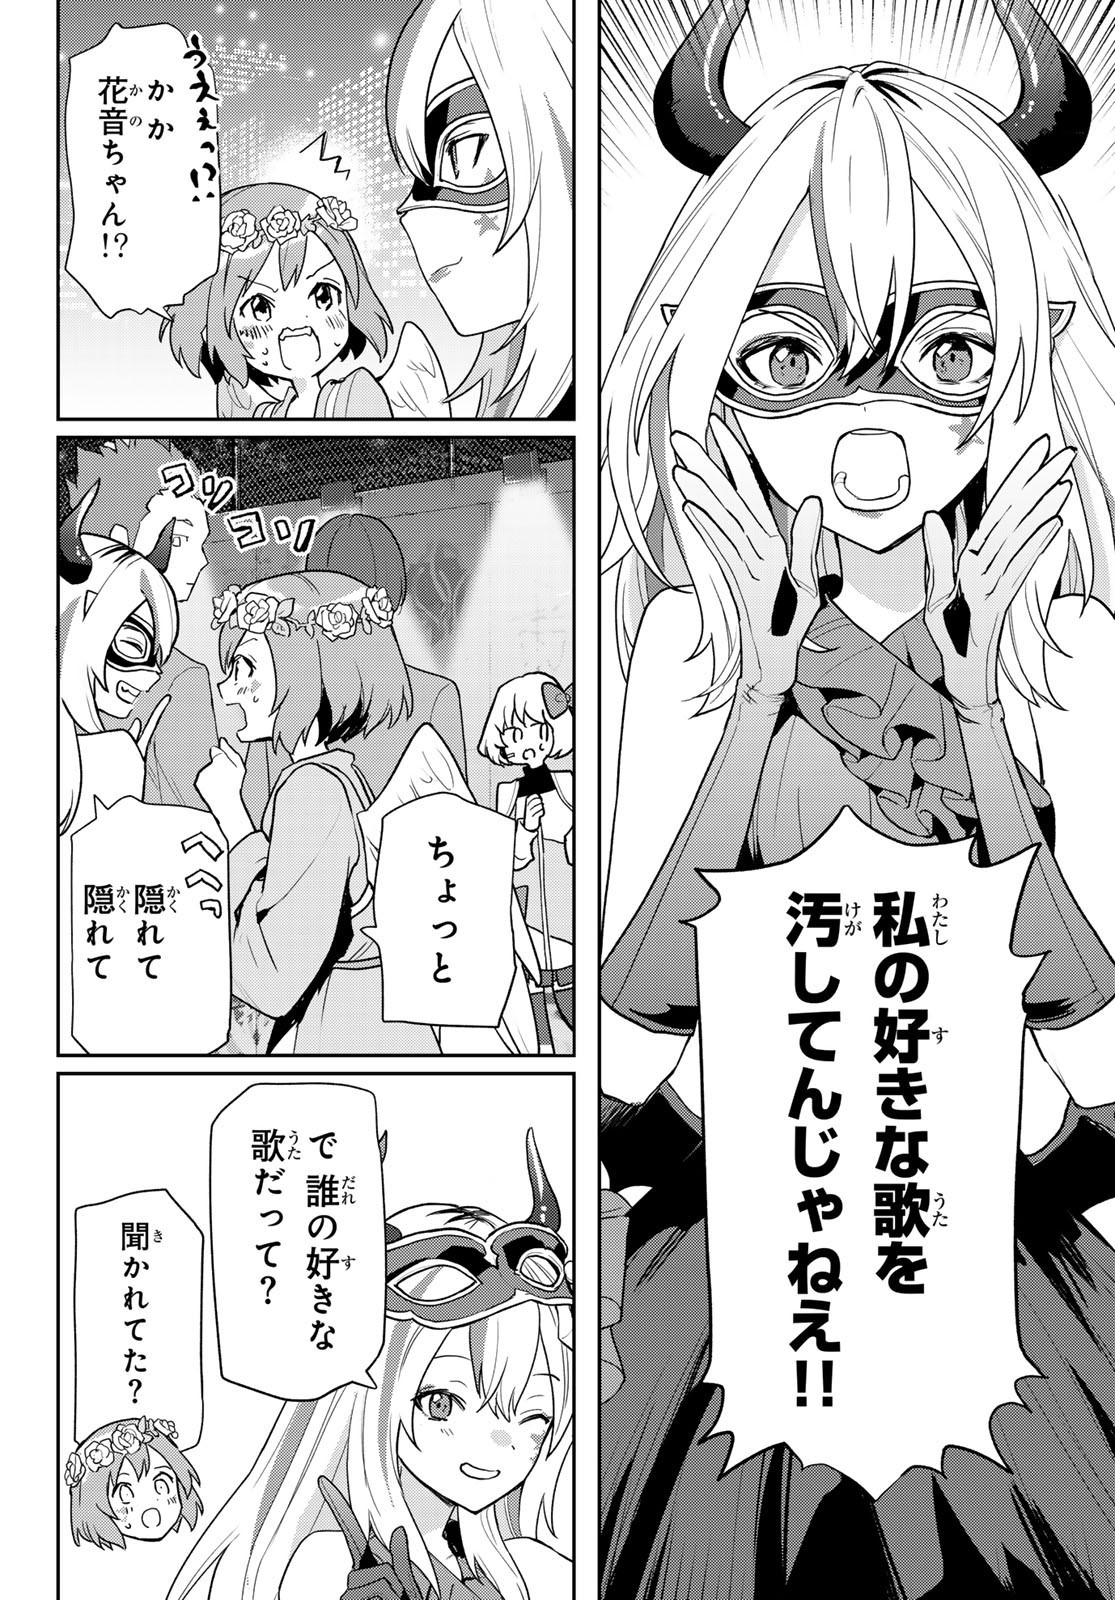 Weekly Shōnen Magazine - 週刊少年マガジン - Chapter 2024-24 - Page 543